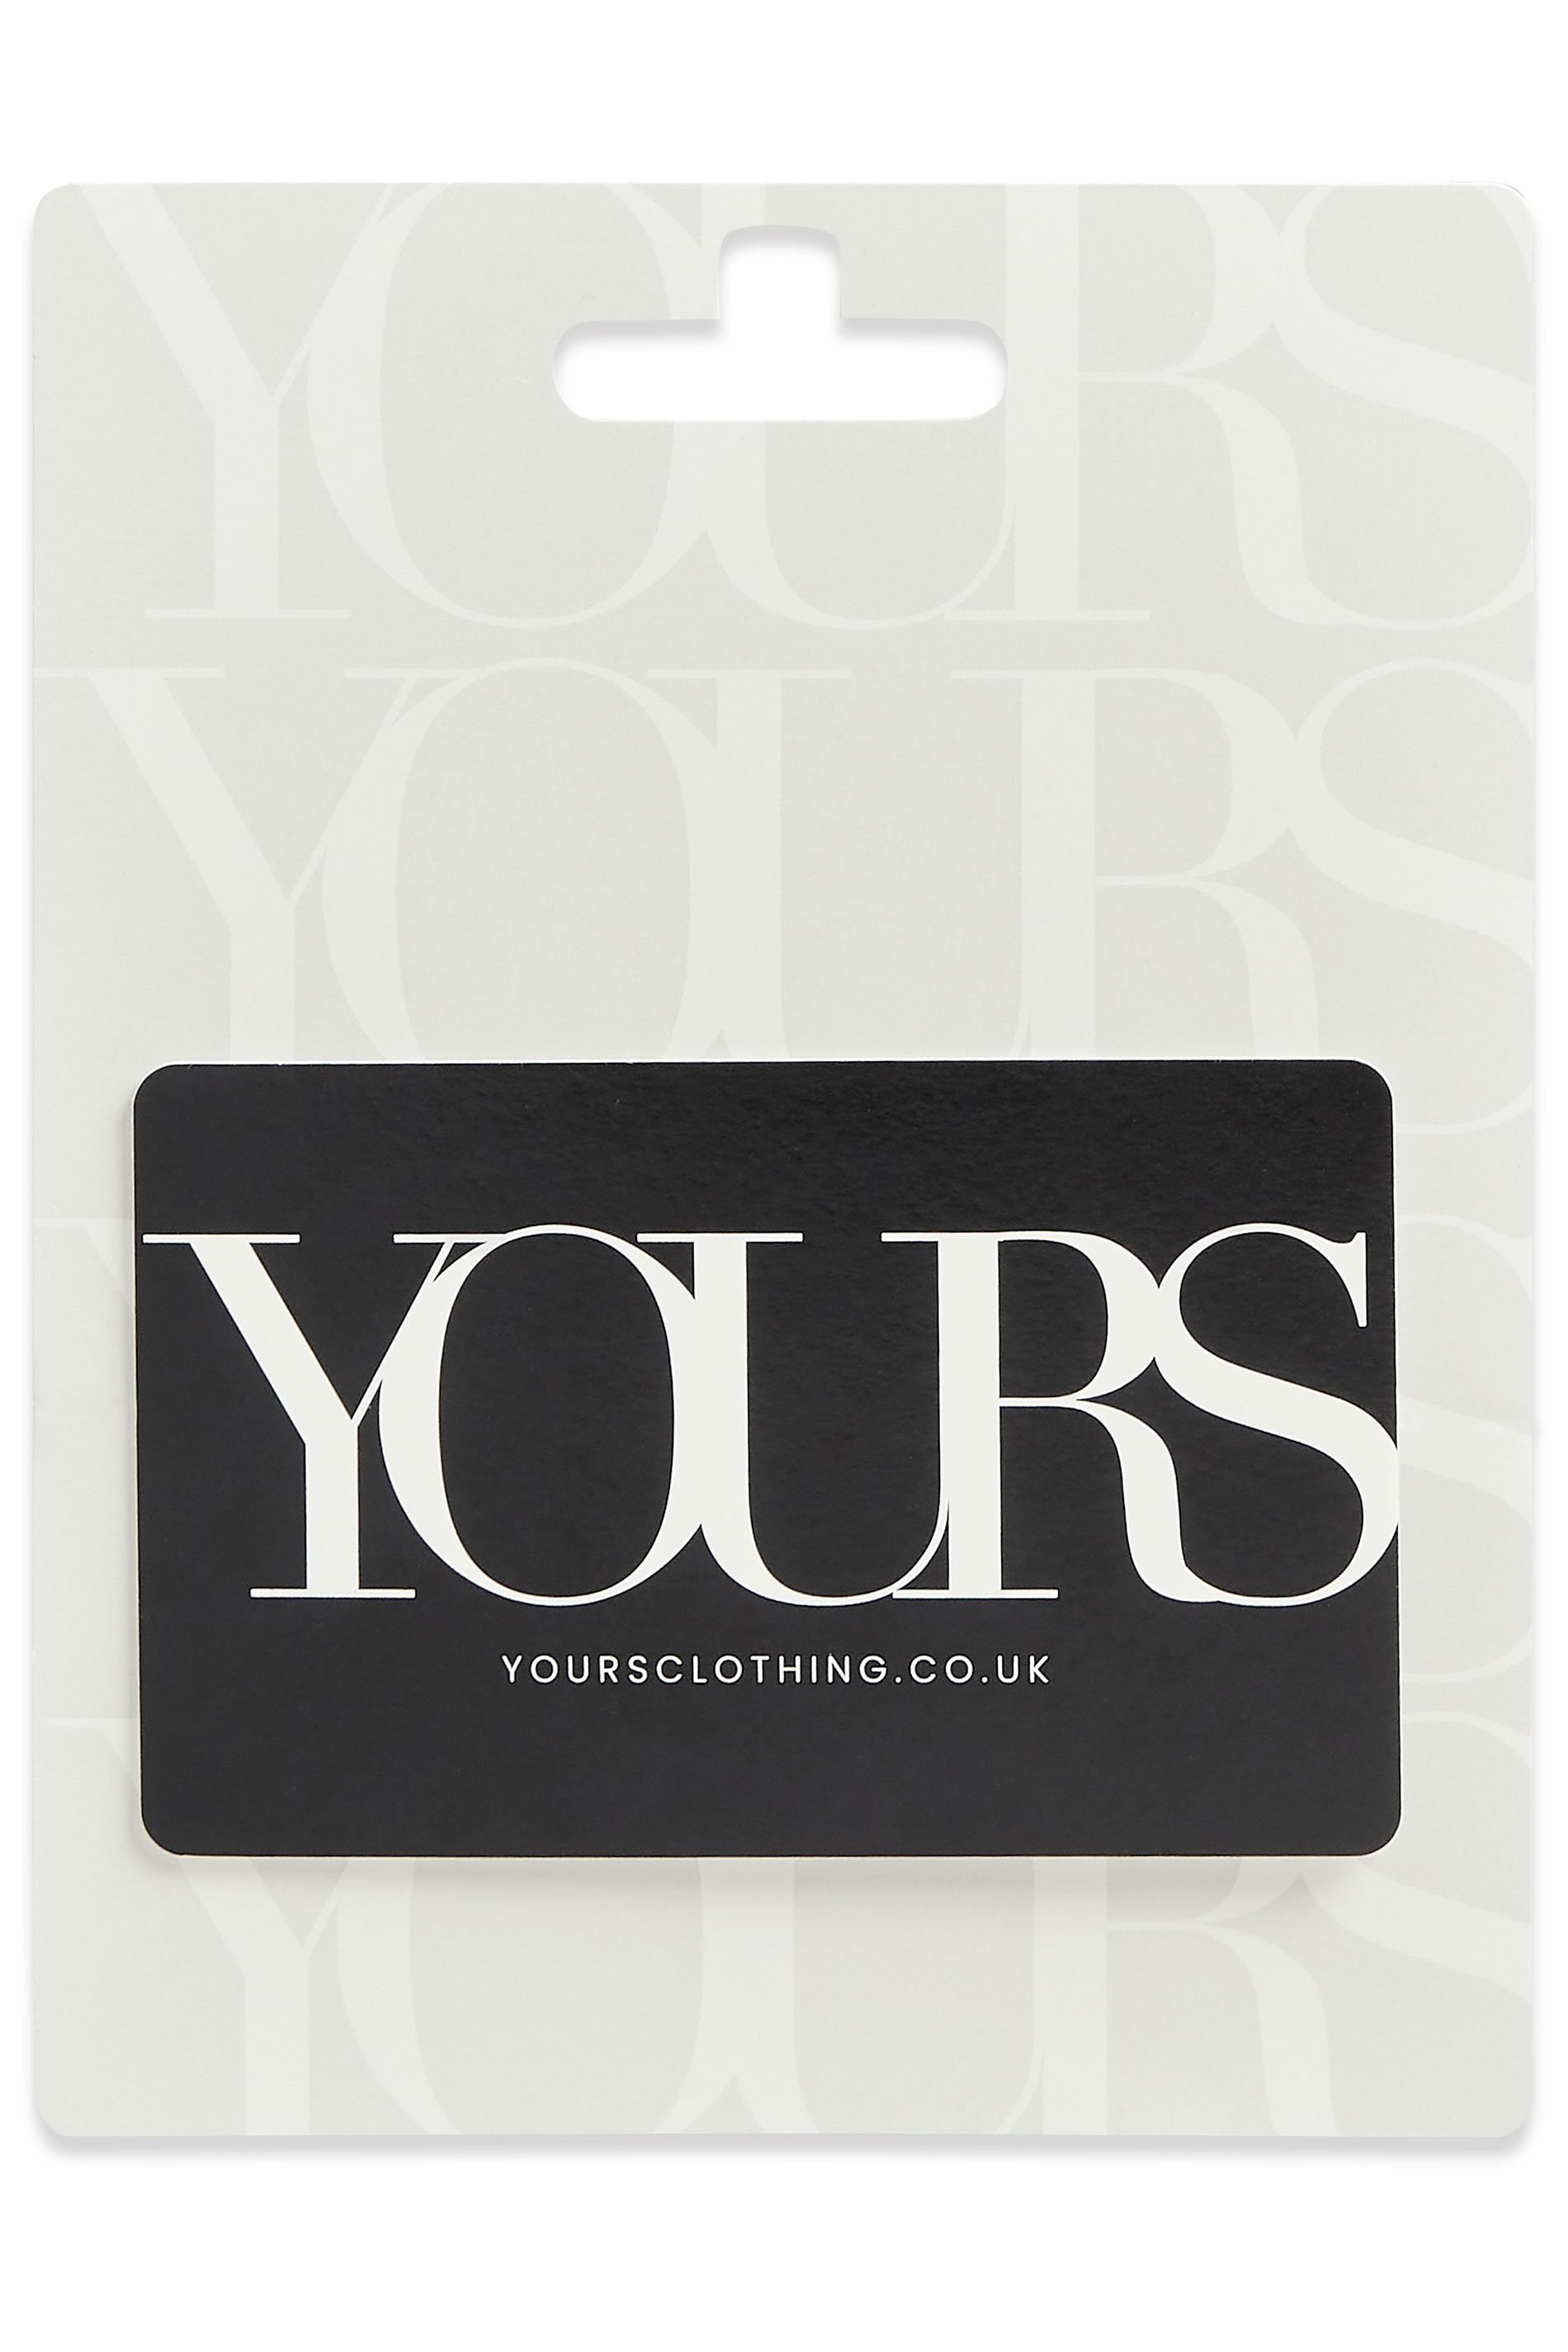 £10 - £150 Yours Clothing Logo Gift Card 1